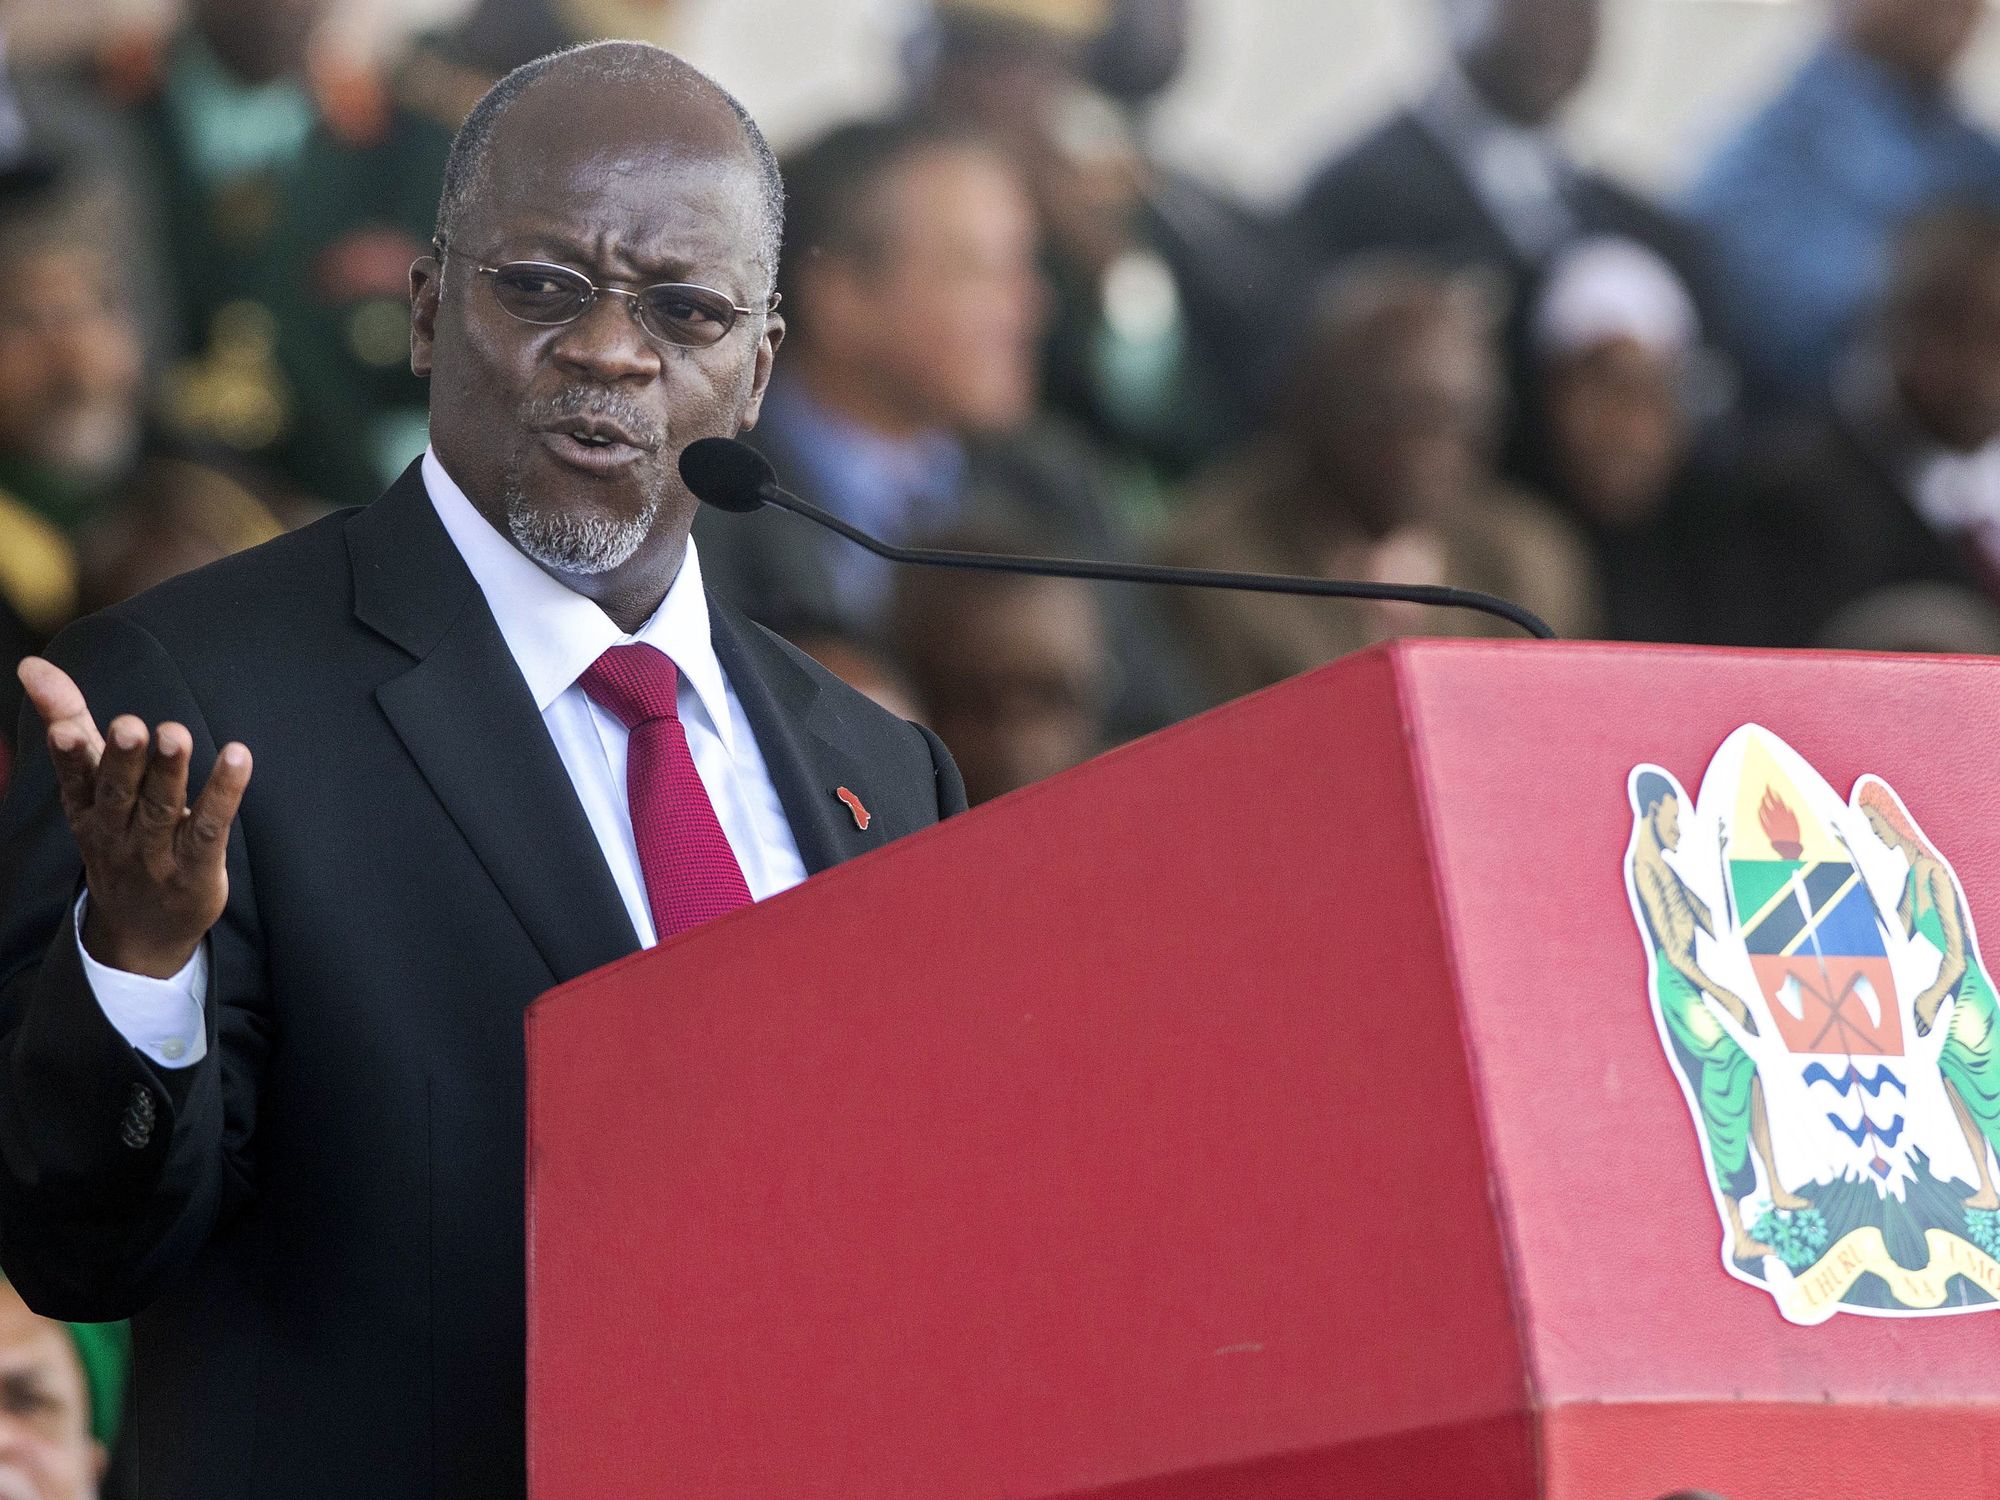 Tanzania Has Made It Illegal to Plan and Support Protests Online